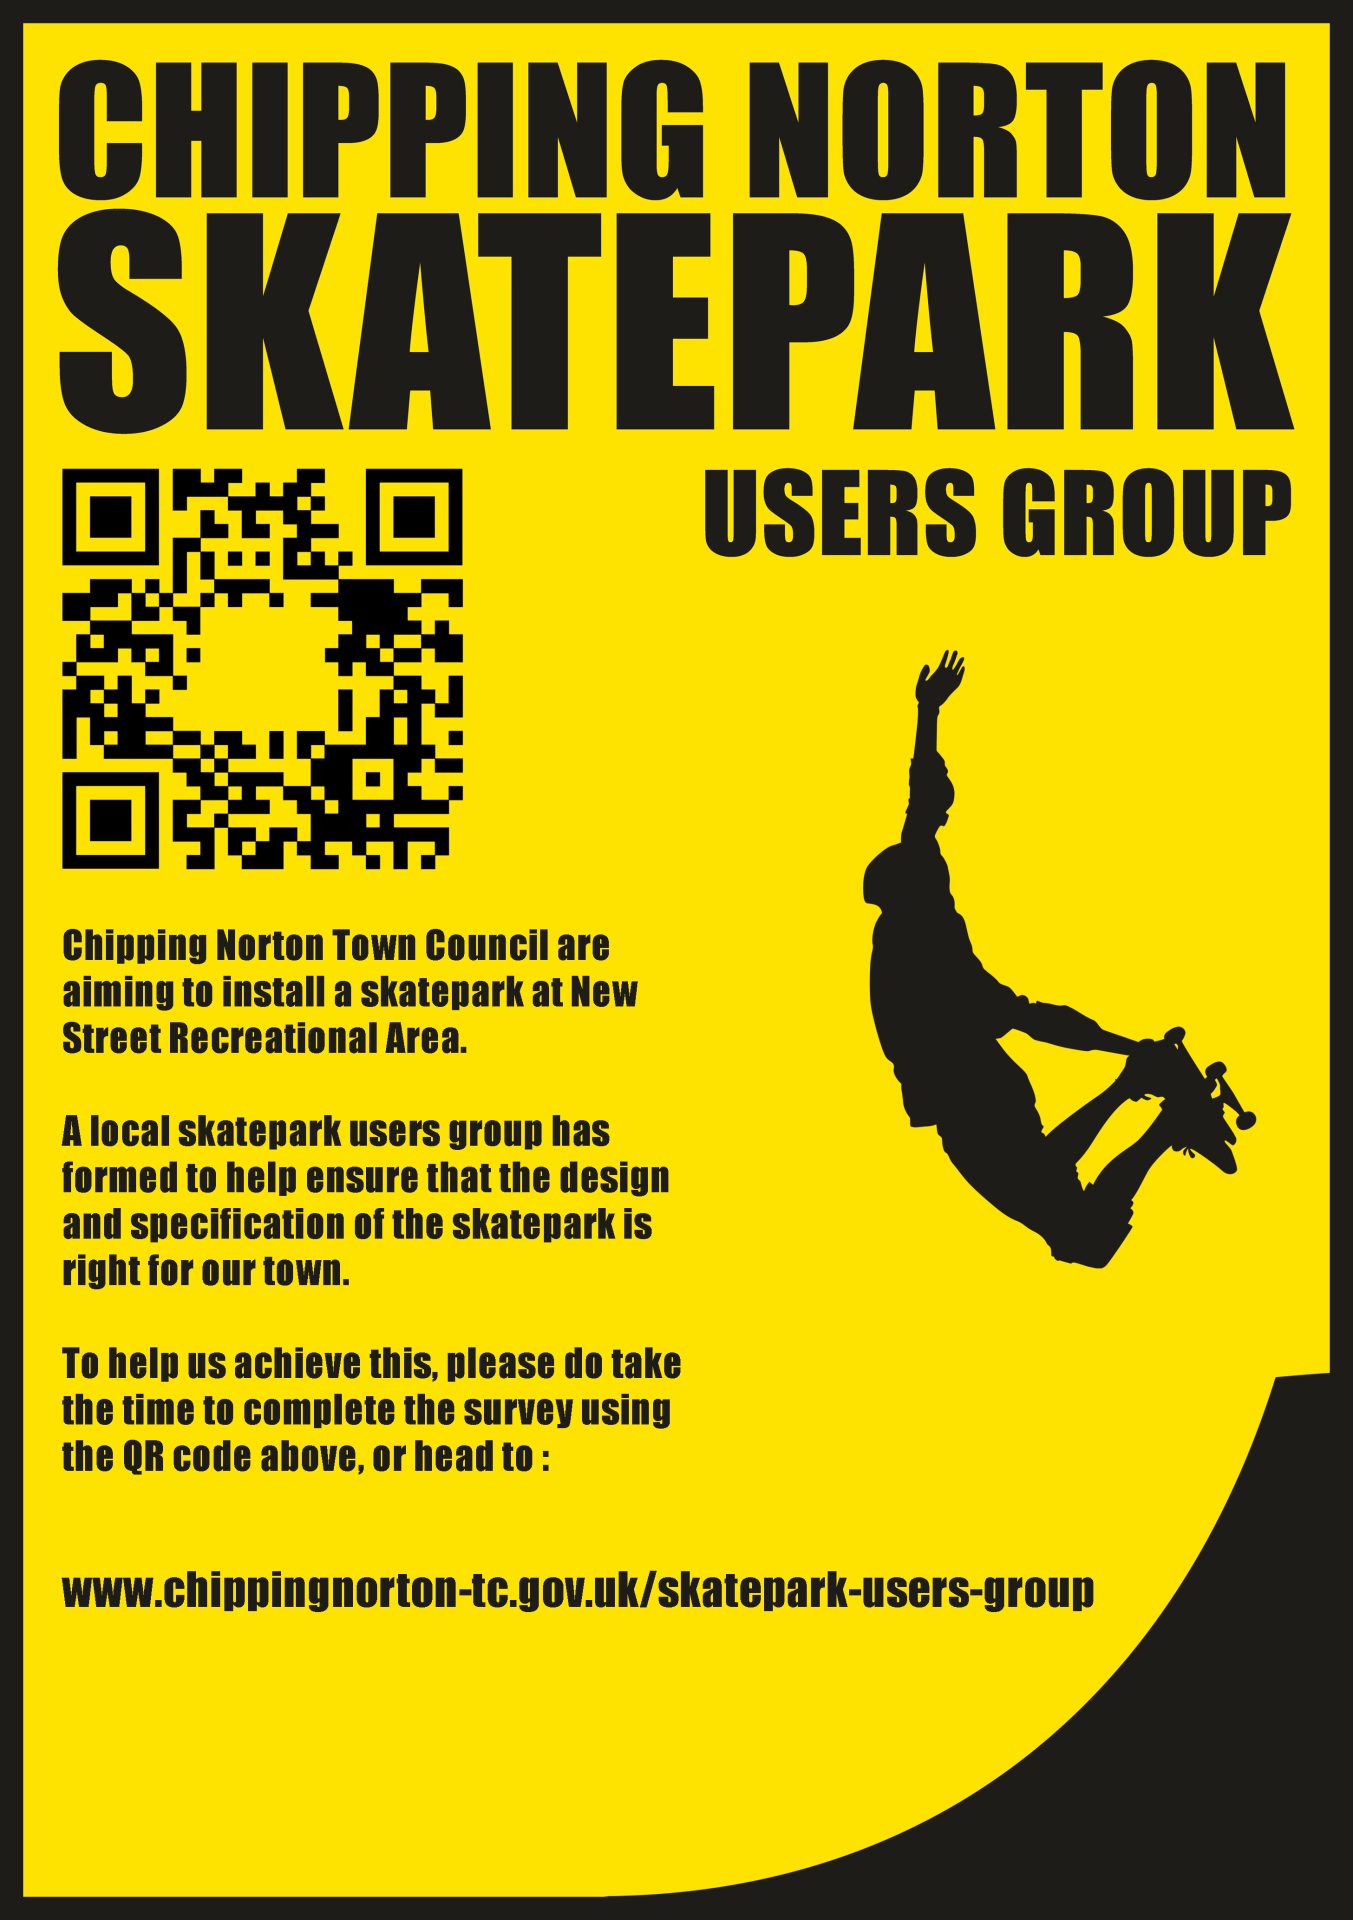 Chipping Norton Town Council are aiming to install a skatepark at New Street Recreation Area. 
A local skatepark users group has been formed to help ensure that the design and specification of the skatepark is right for our town. 
To help us achieve this, please do take the time to complete the survey using the QR code or head to http://tiny.cc/k6xevz